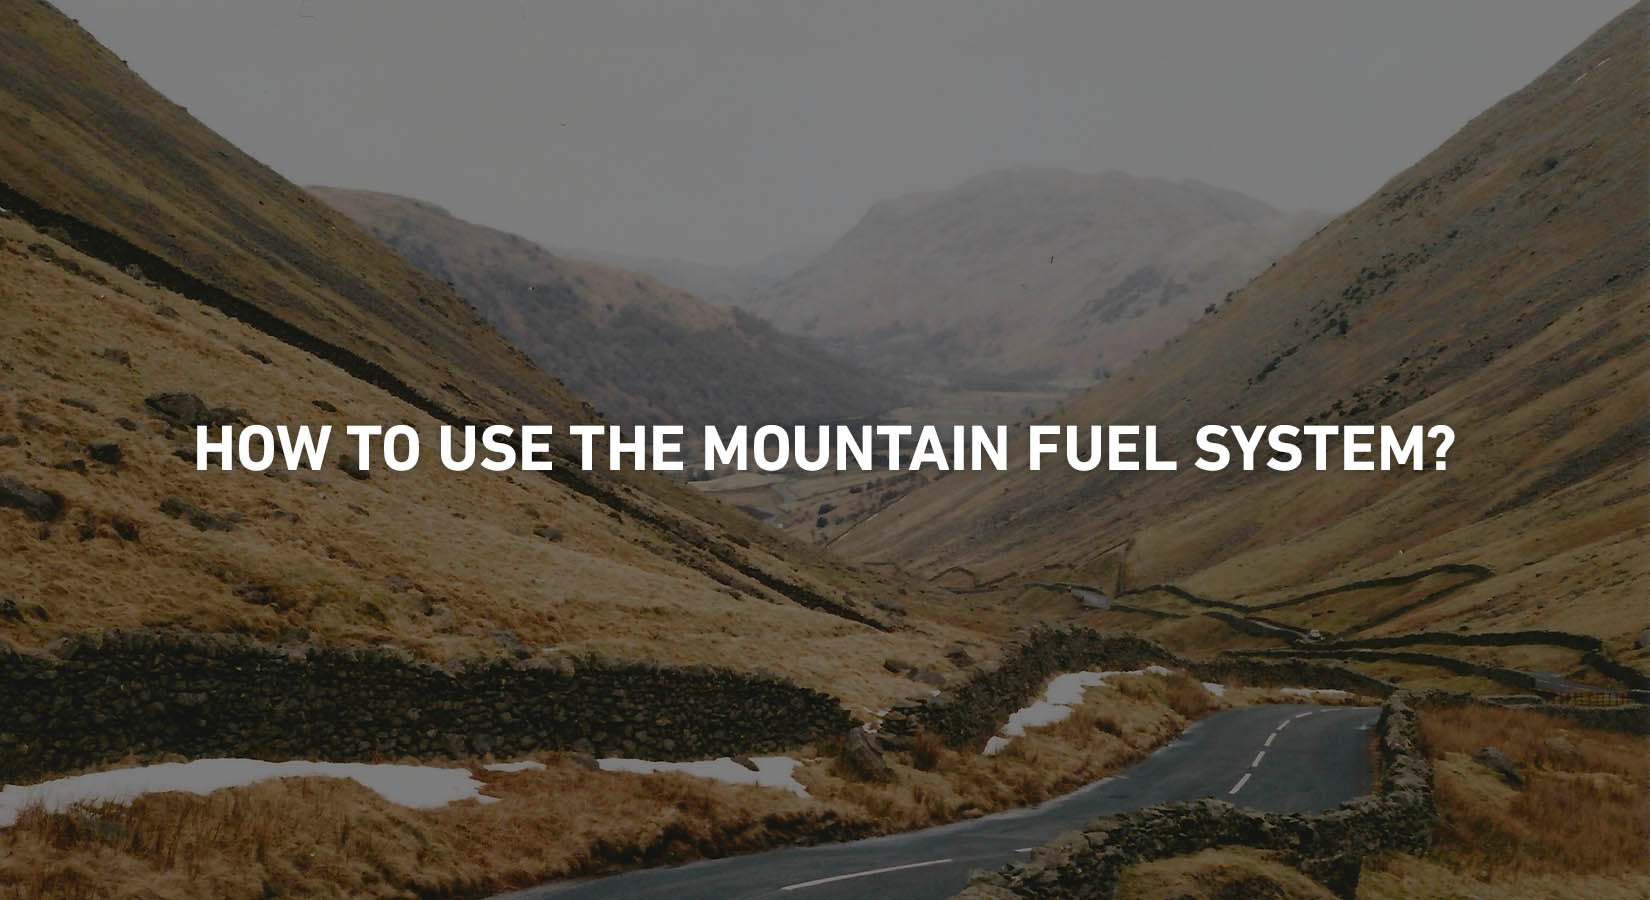 How to use the Mountain Fuel System?